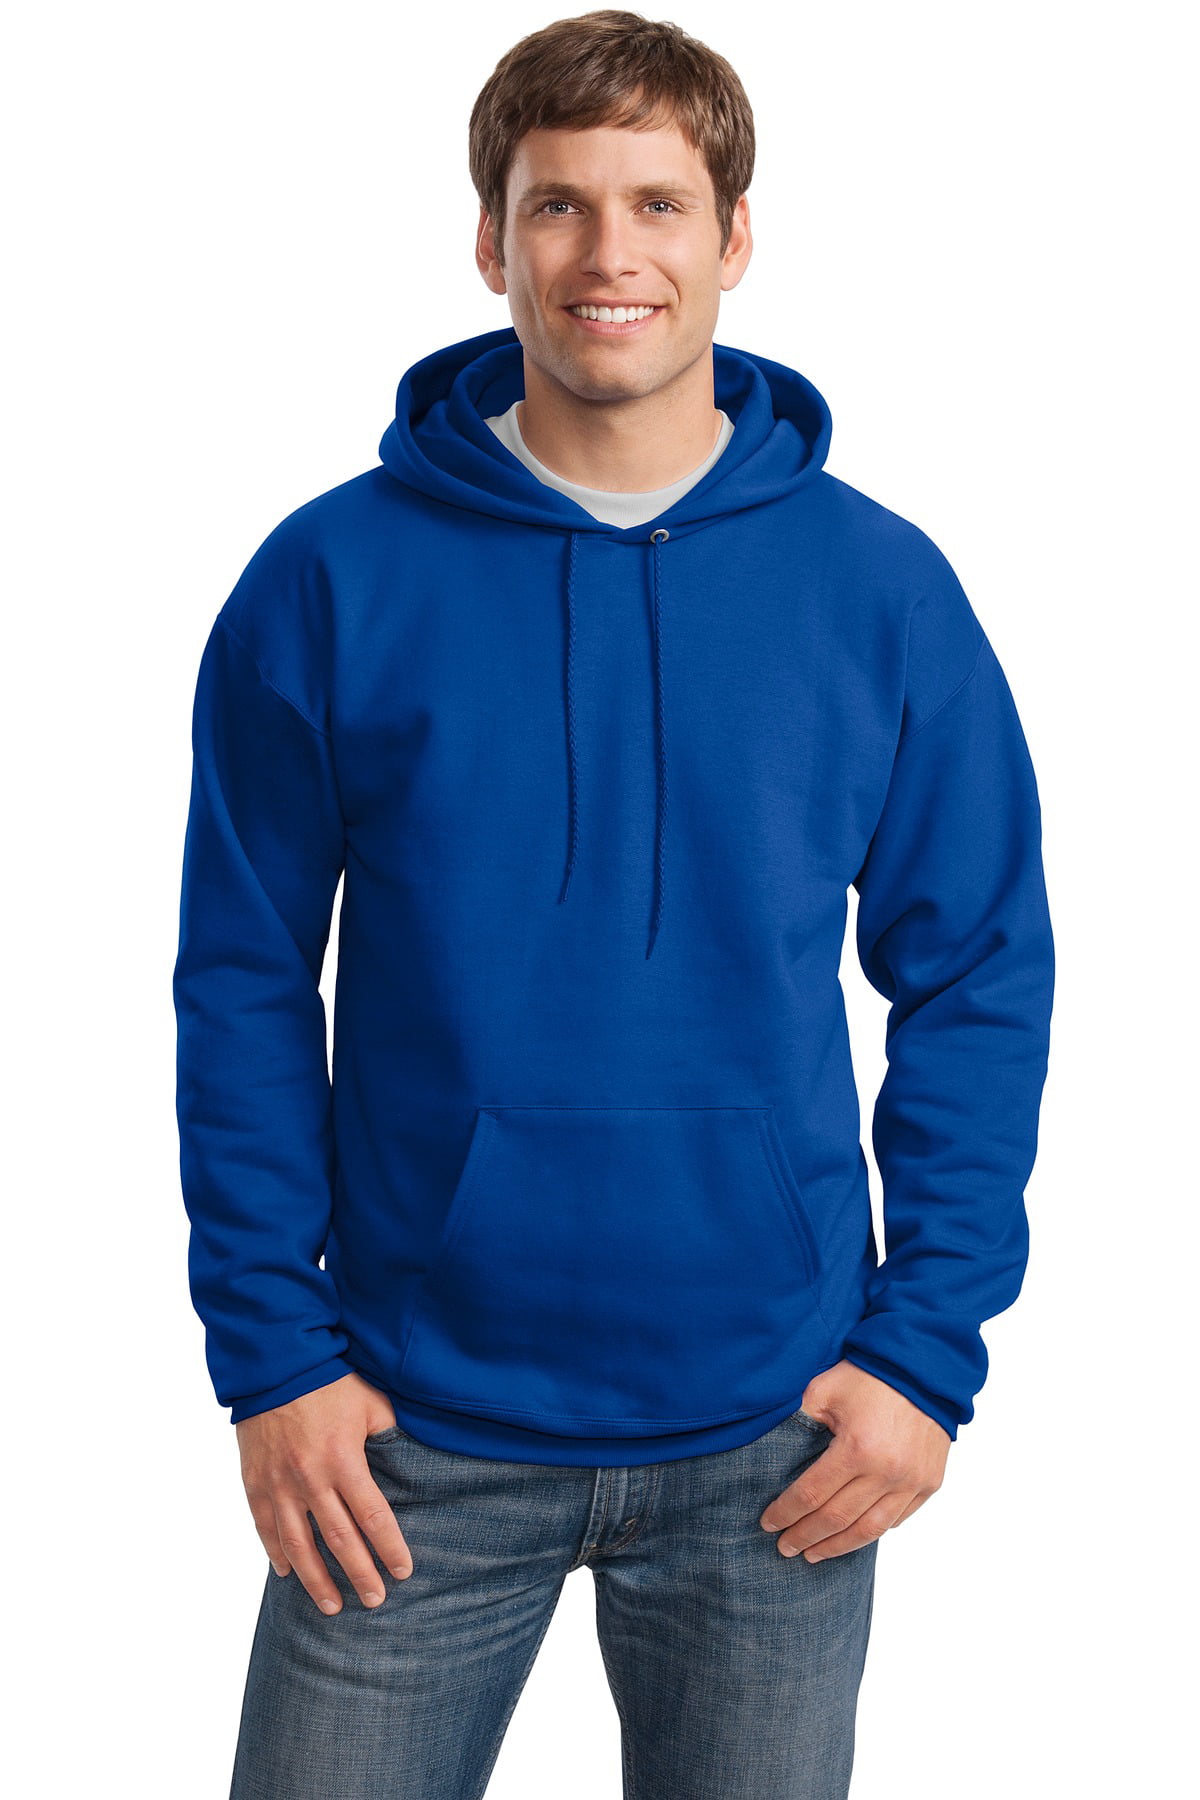 Hanes Men's Front Pouch Pocket Pullover Hooded Sweatshirt - F170 